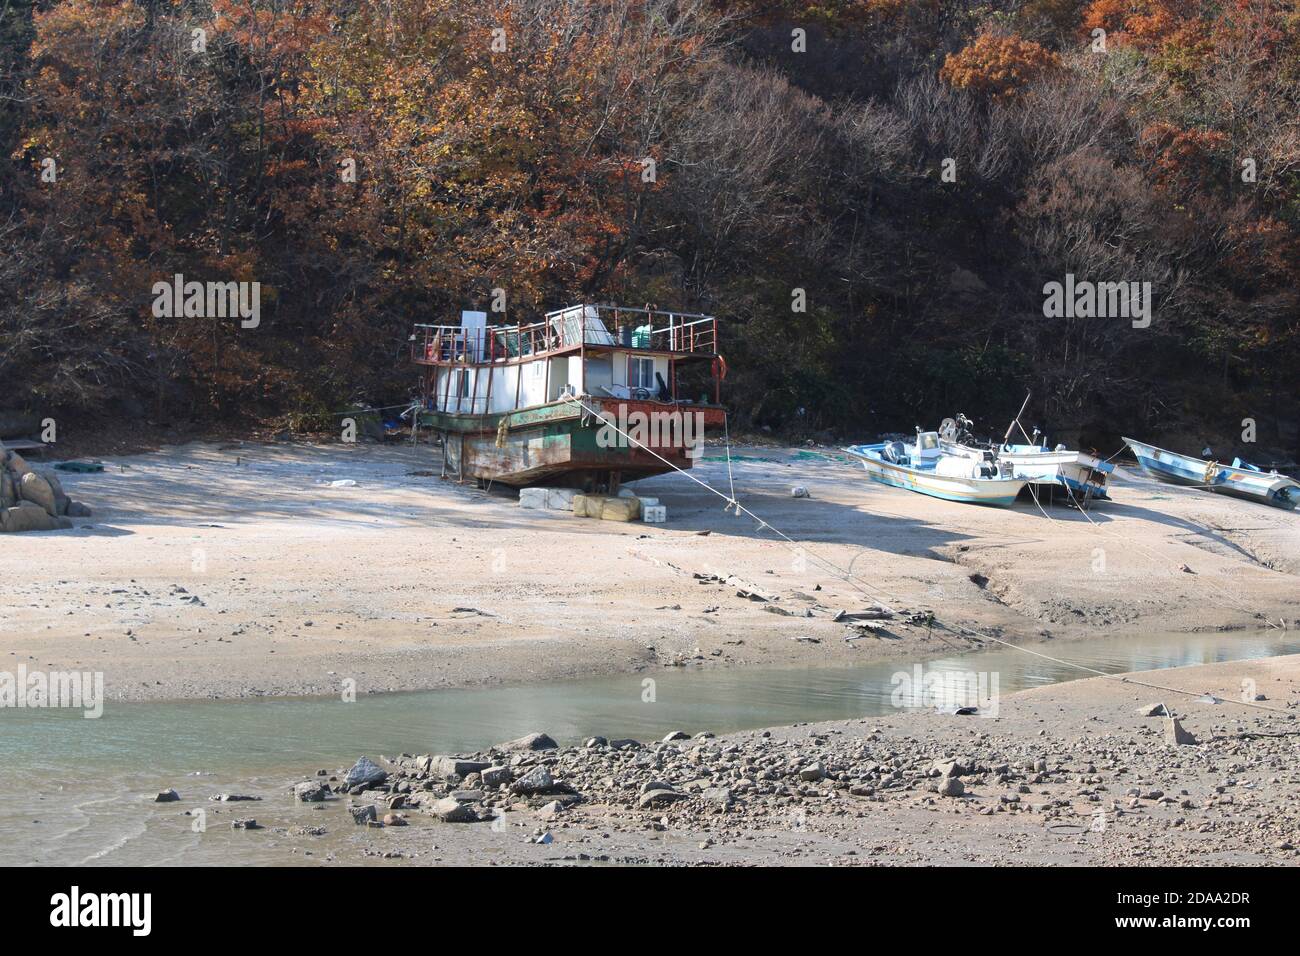 Fishing boats and an old house boat beached in low tide Stock Photo